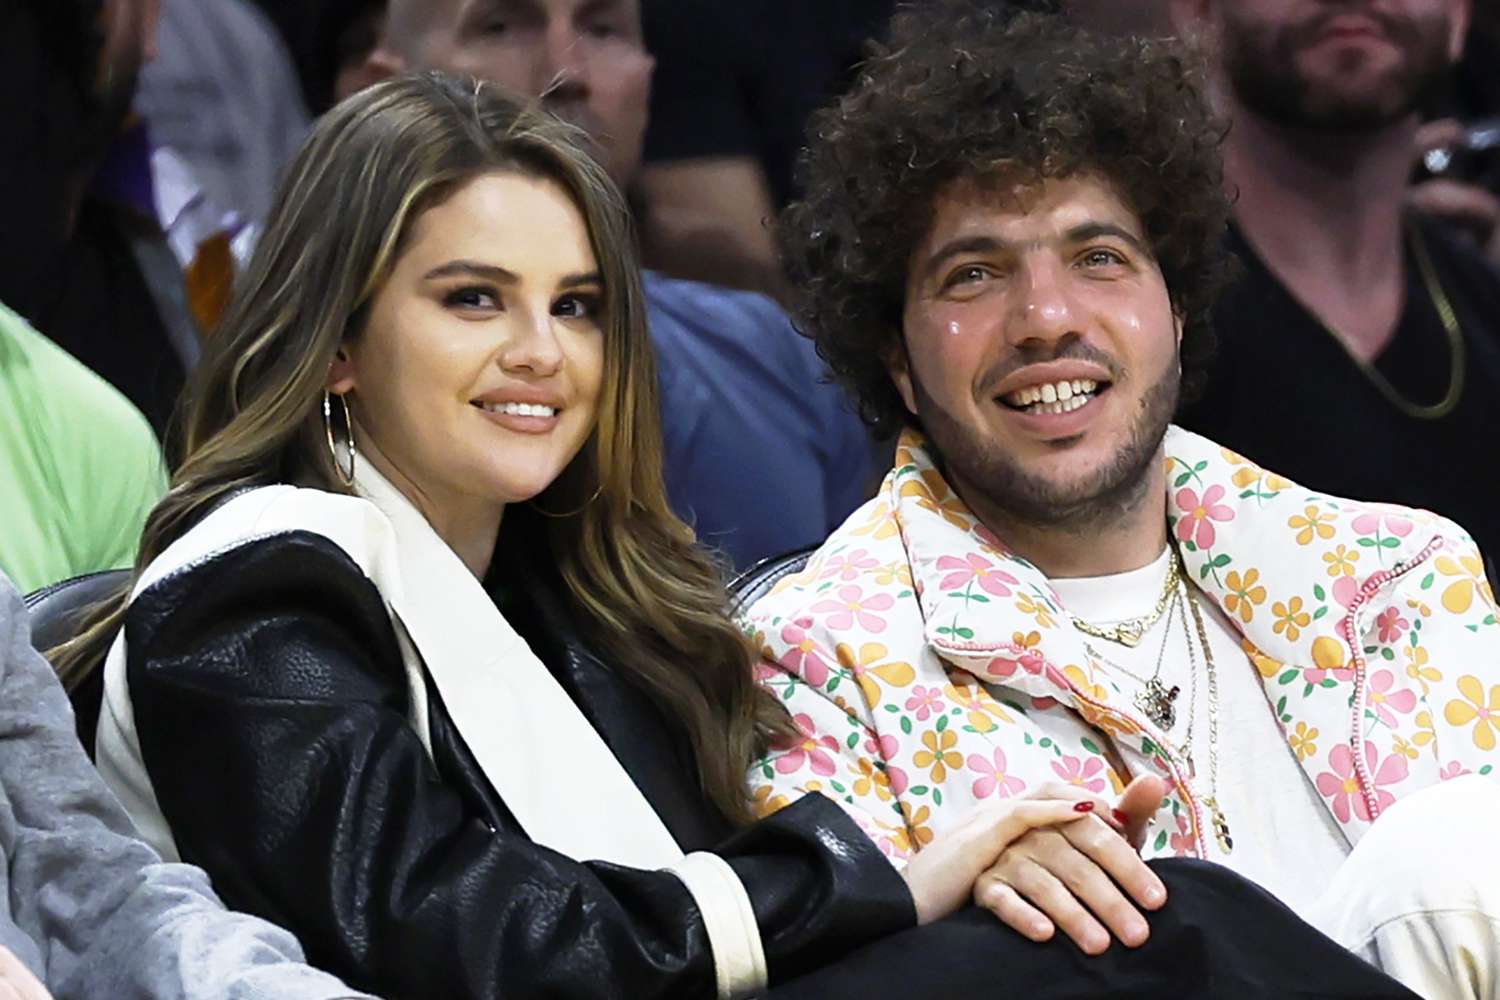 Benny Blanco 'Brought a Deep Fryer' and 'Nacho Machine' to Movie Theater Date with Selena Gomez to Make Fave Foods